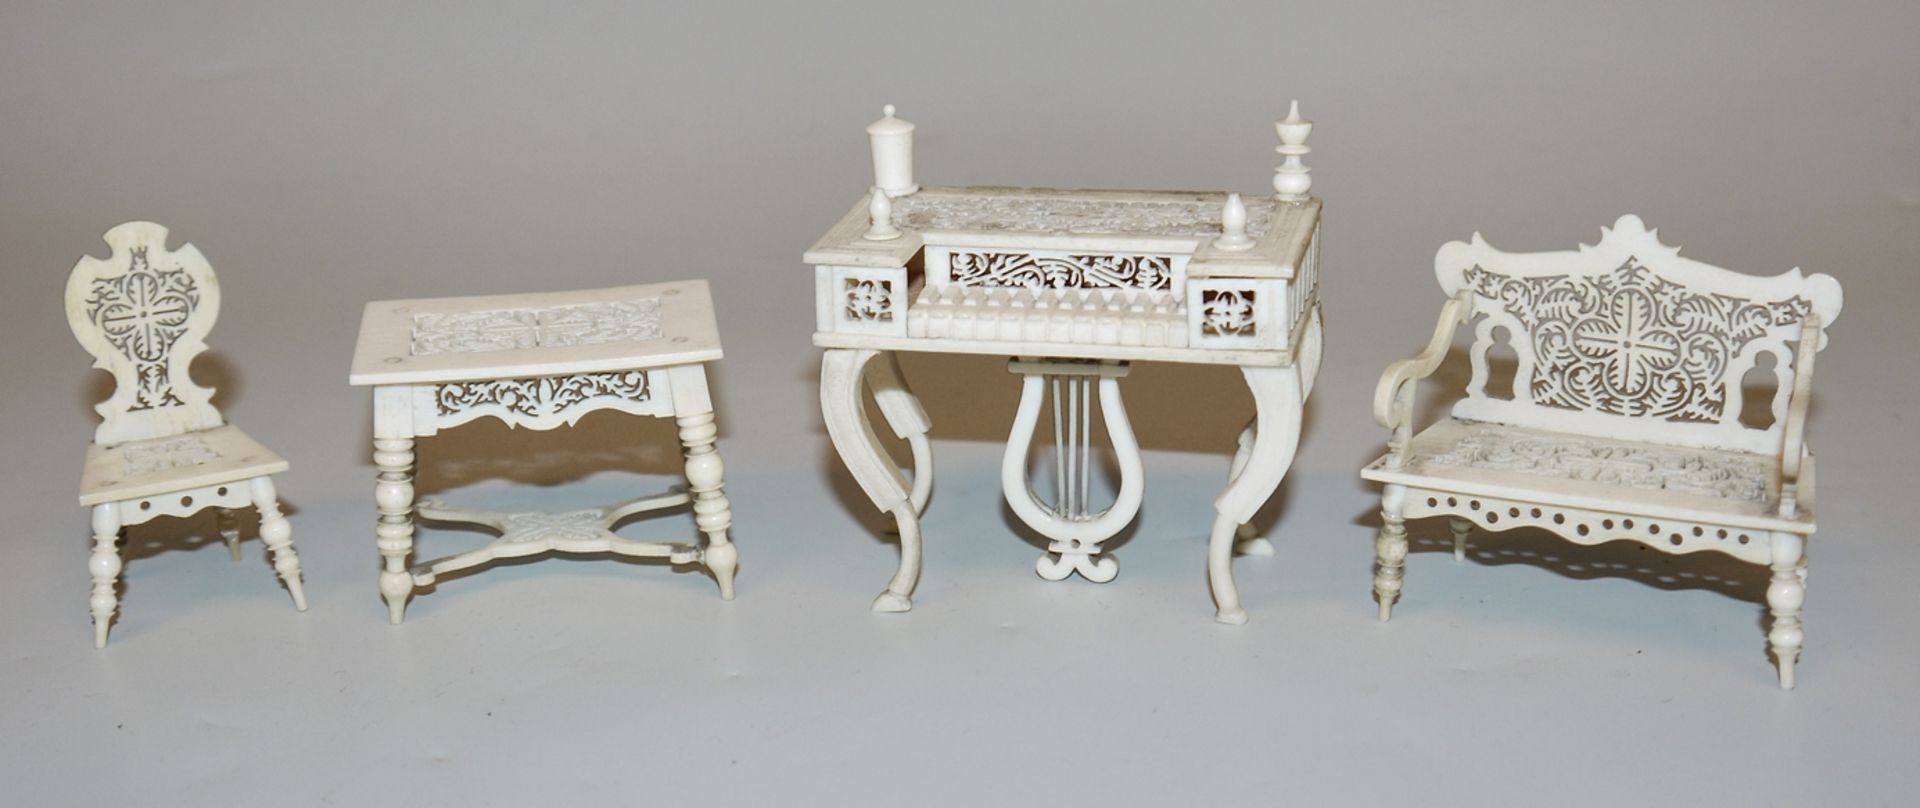 Four filigree pieces of Biedermeier doll's house furniture, 19th century